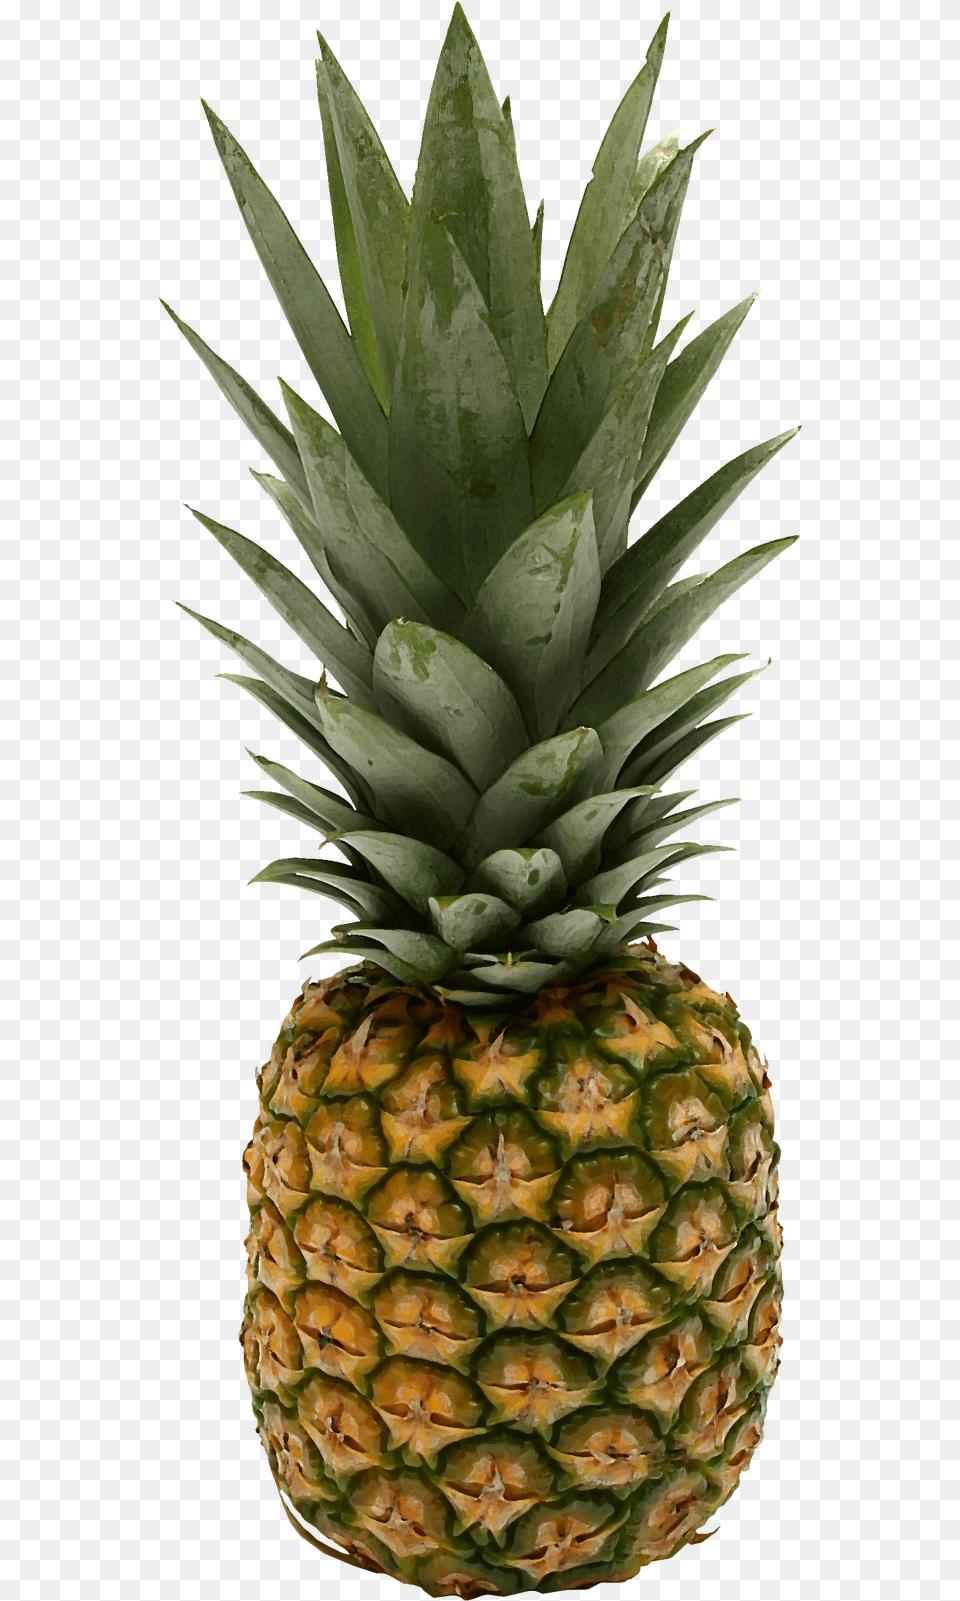 Pineapple Small Pics Of Pineapples 643x1600 Pineapple, Food, Fruit, Plant, Produce Free Transparent Png